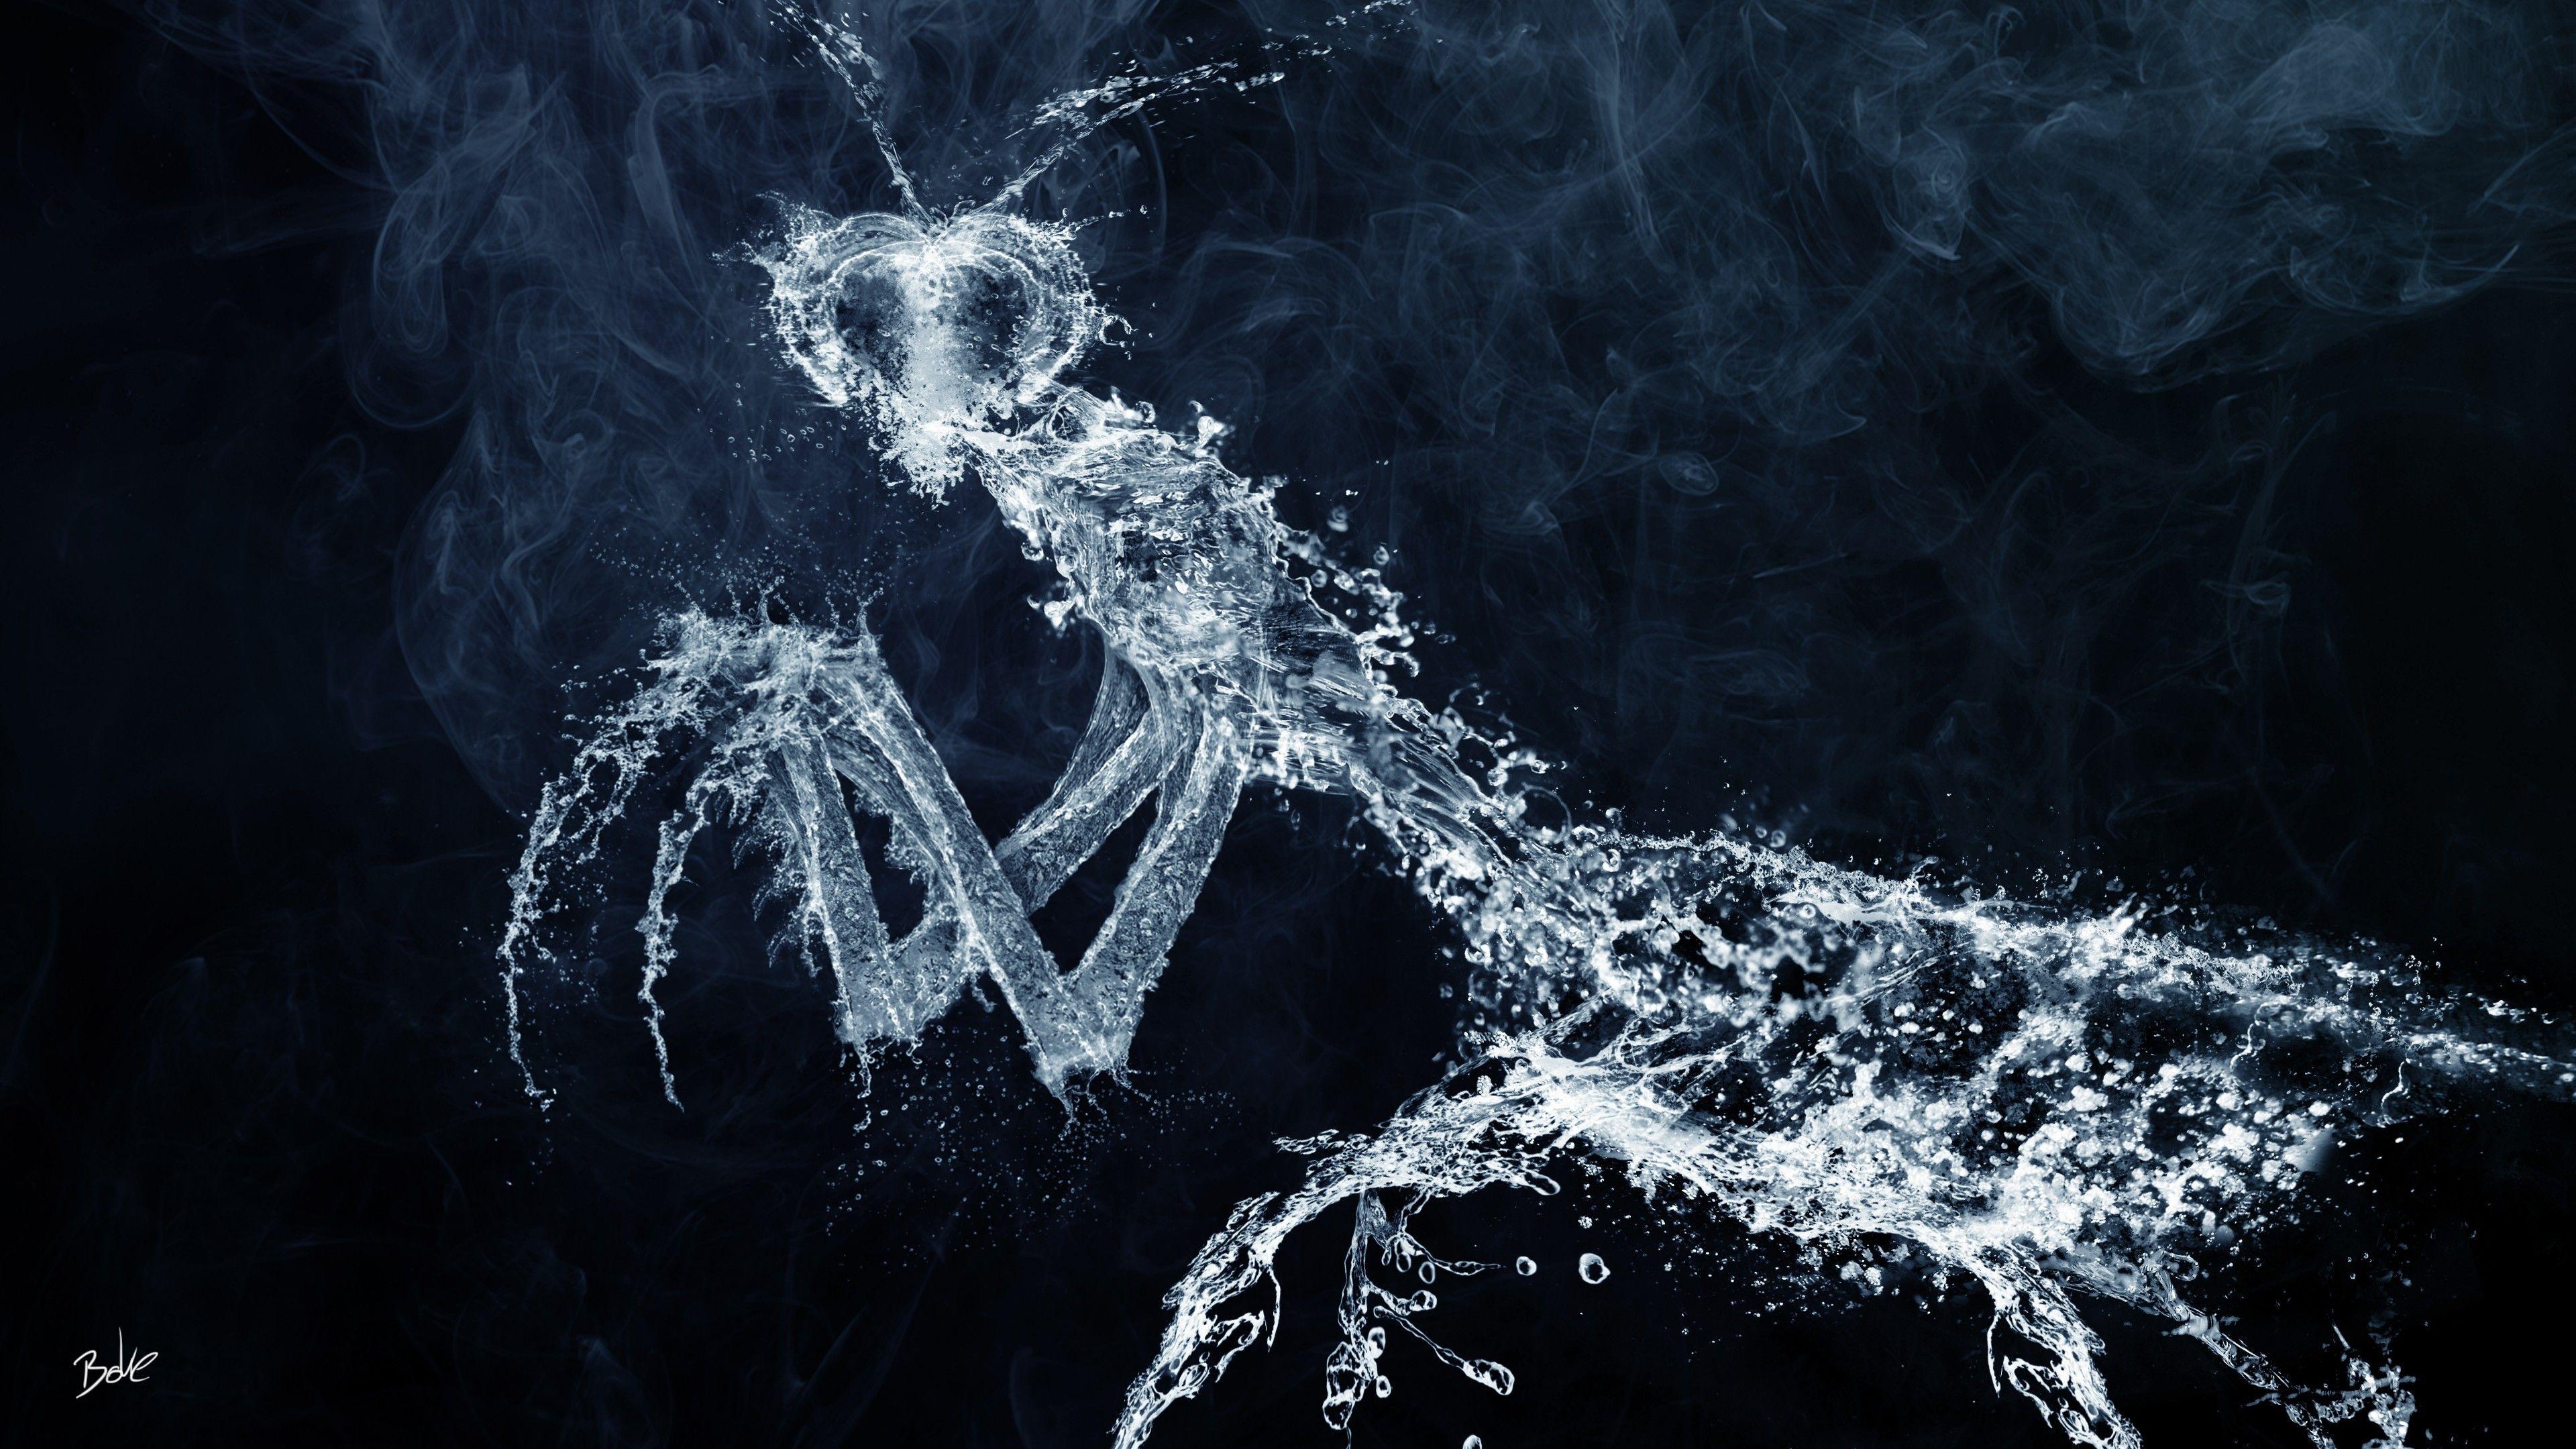 The figure of a praying mantis from the water wallpaper and image